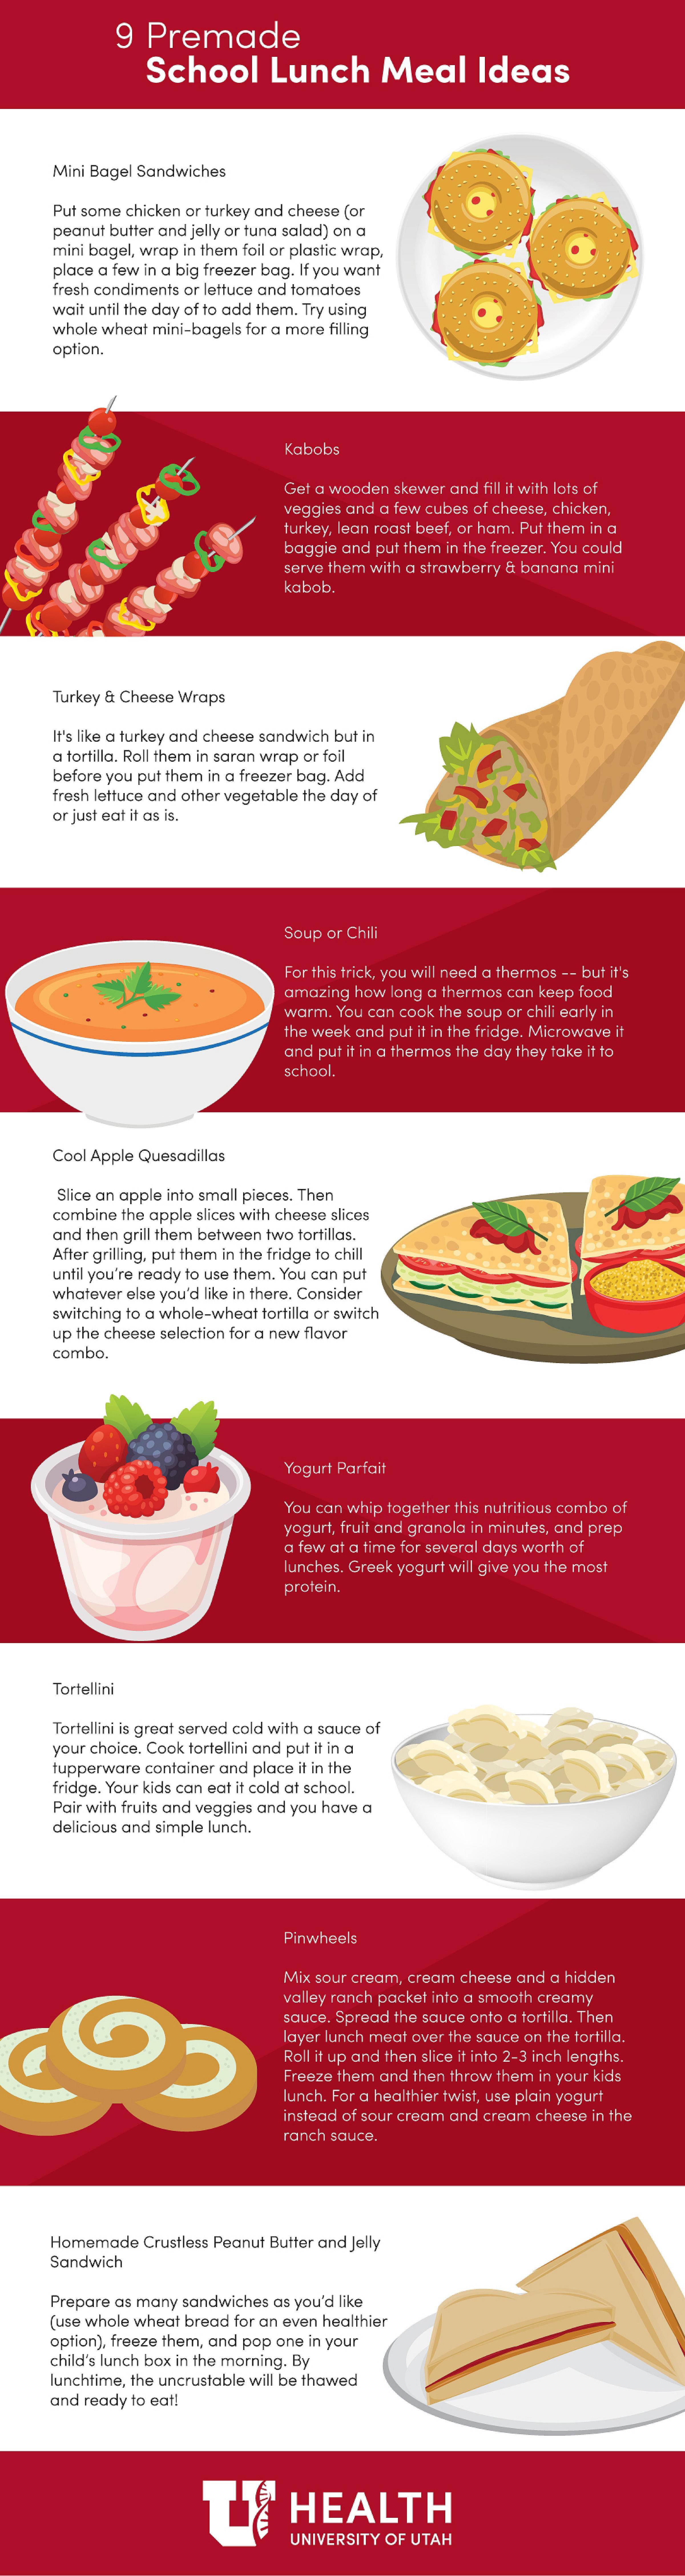 School lunch infographic.